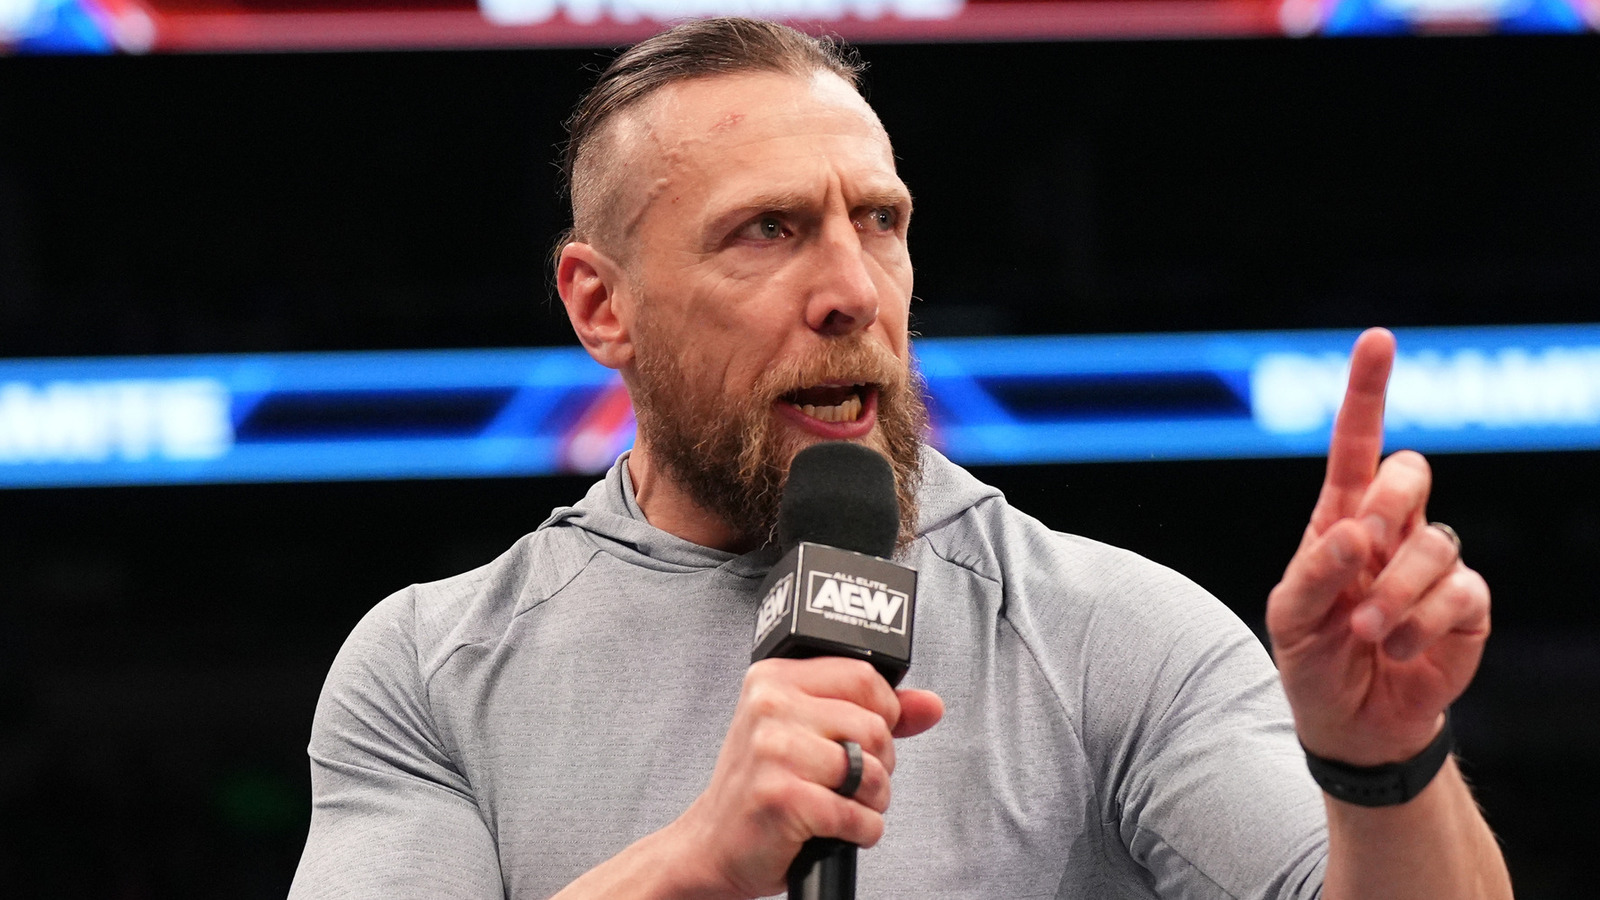 AEW's Bryan Danielson Opens Up About His Health, Daily Issues